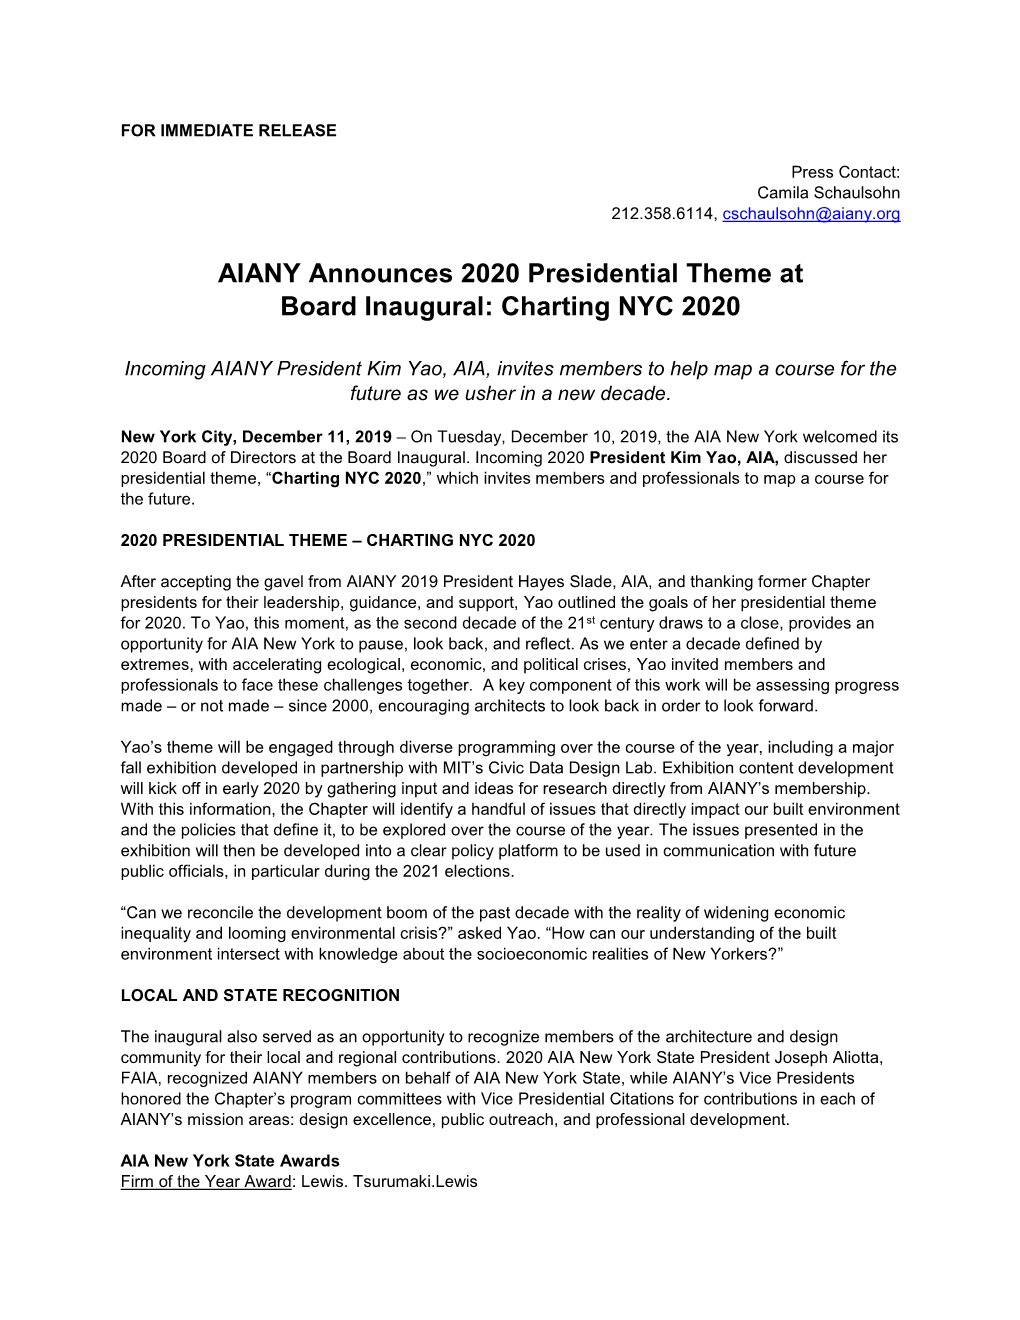 AIANY Announces 2020 Presidential Theme at Board Inaugural: Charting NYC 2020